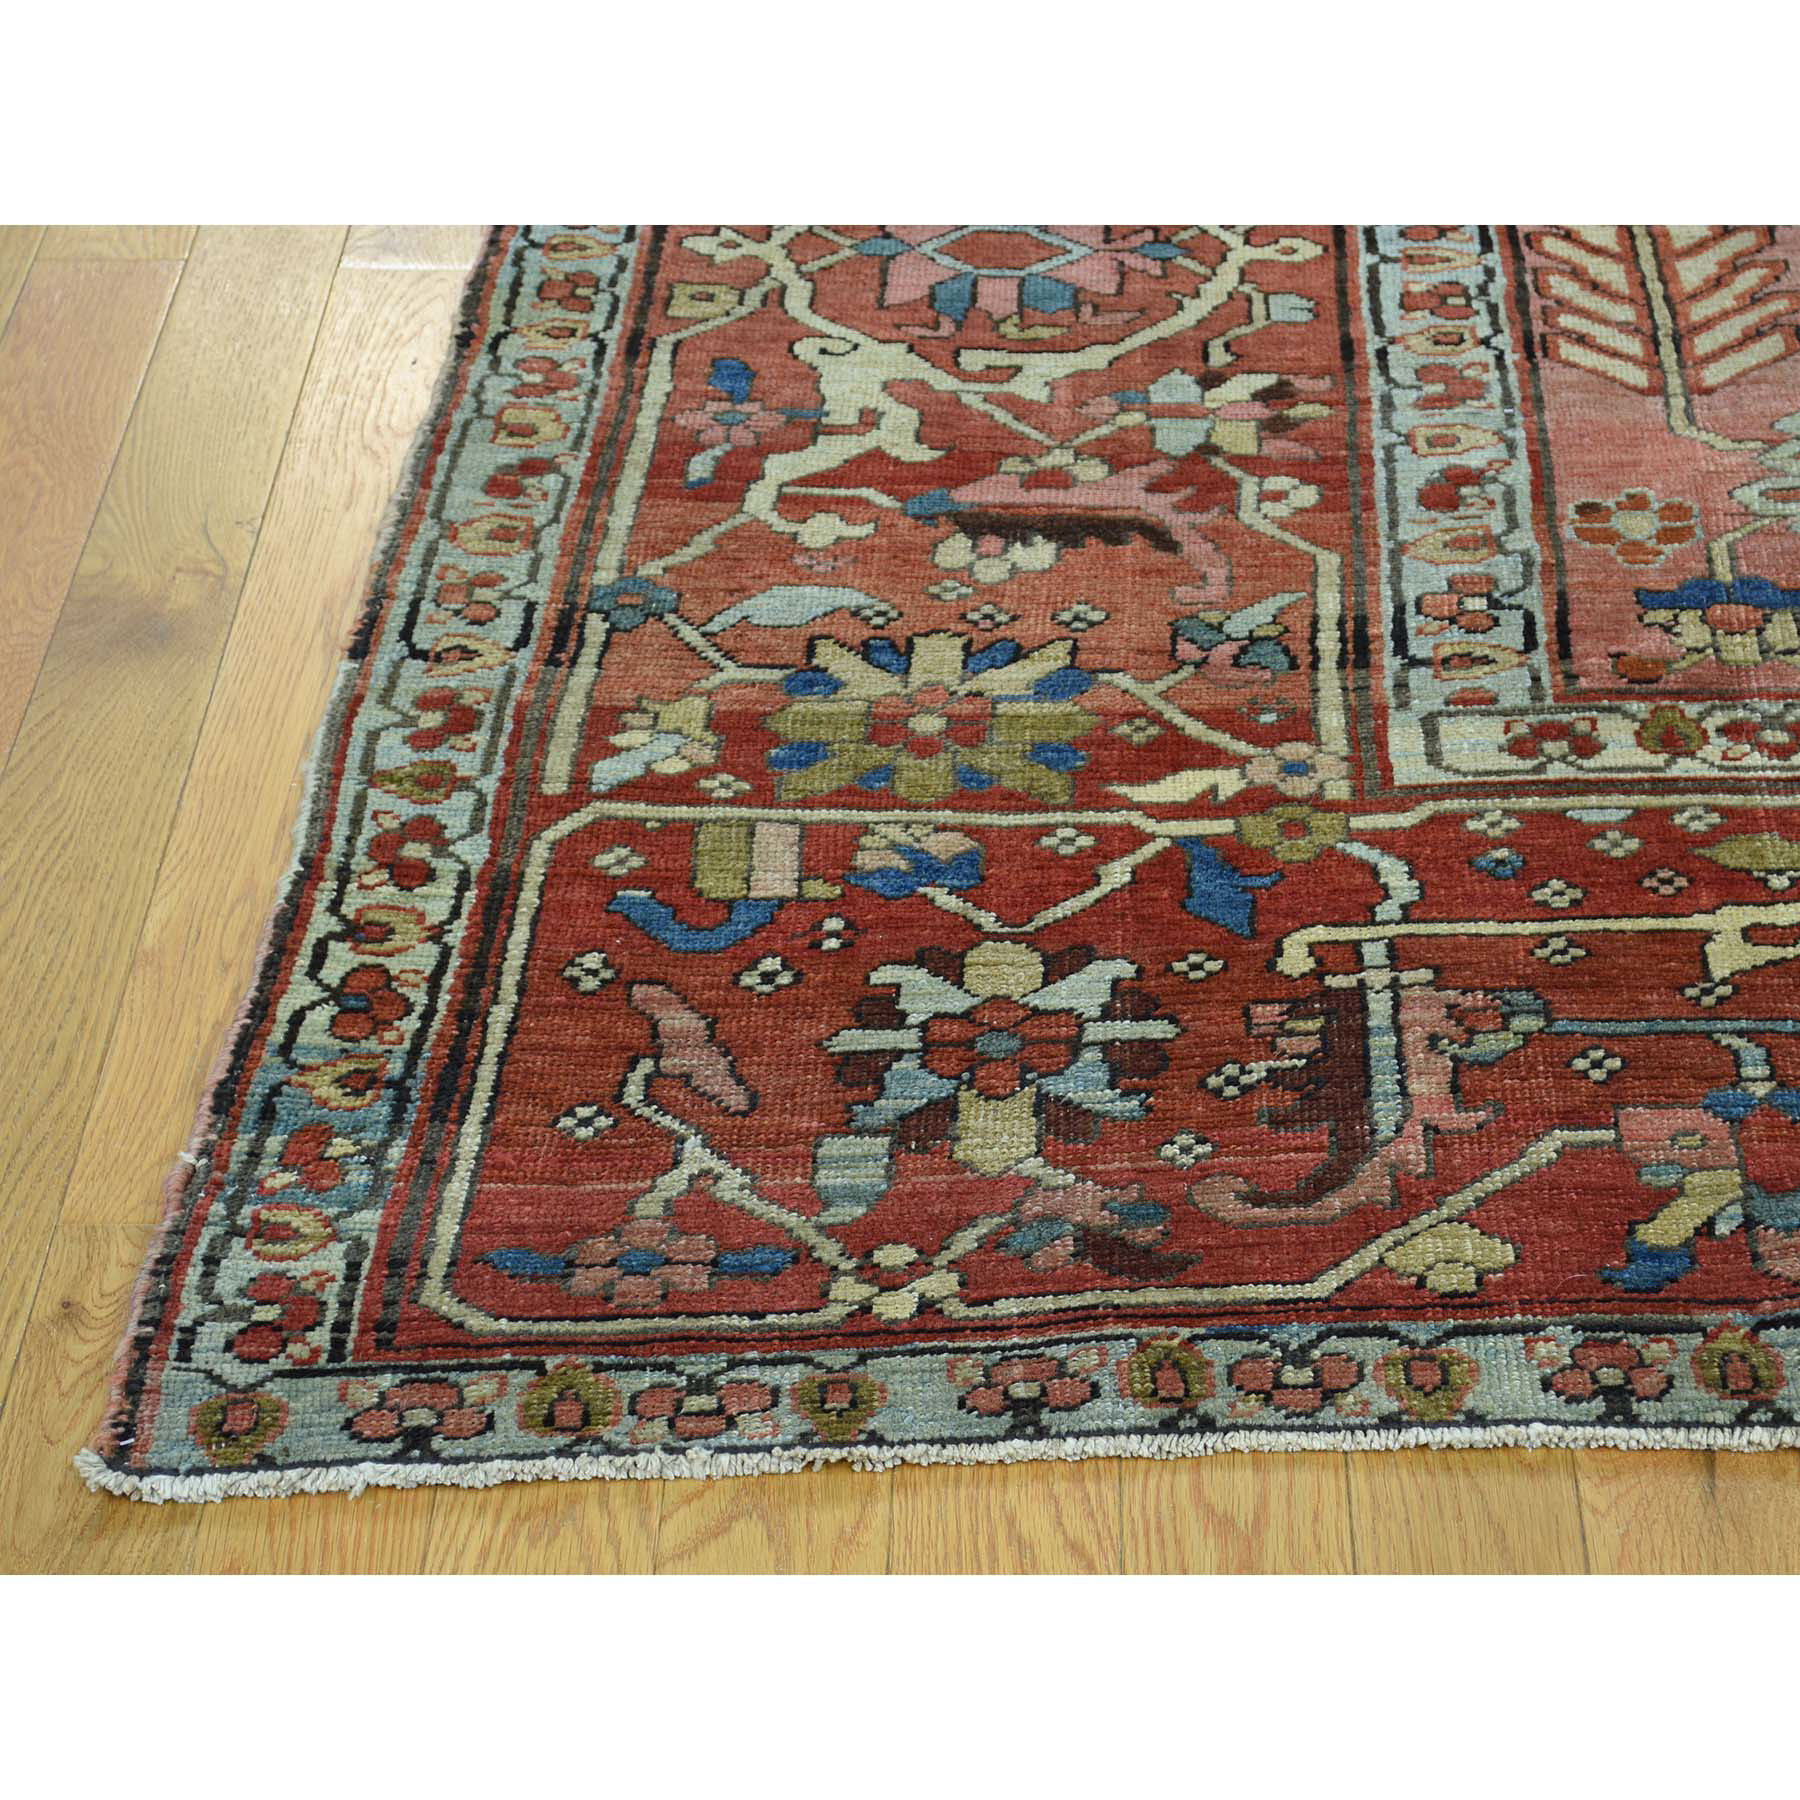 9-7 x12-4  Good Condition Antique Persian Serapi Hand-Knotted Rug 